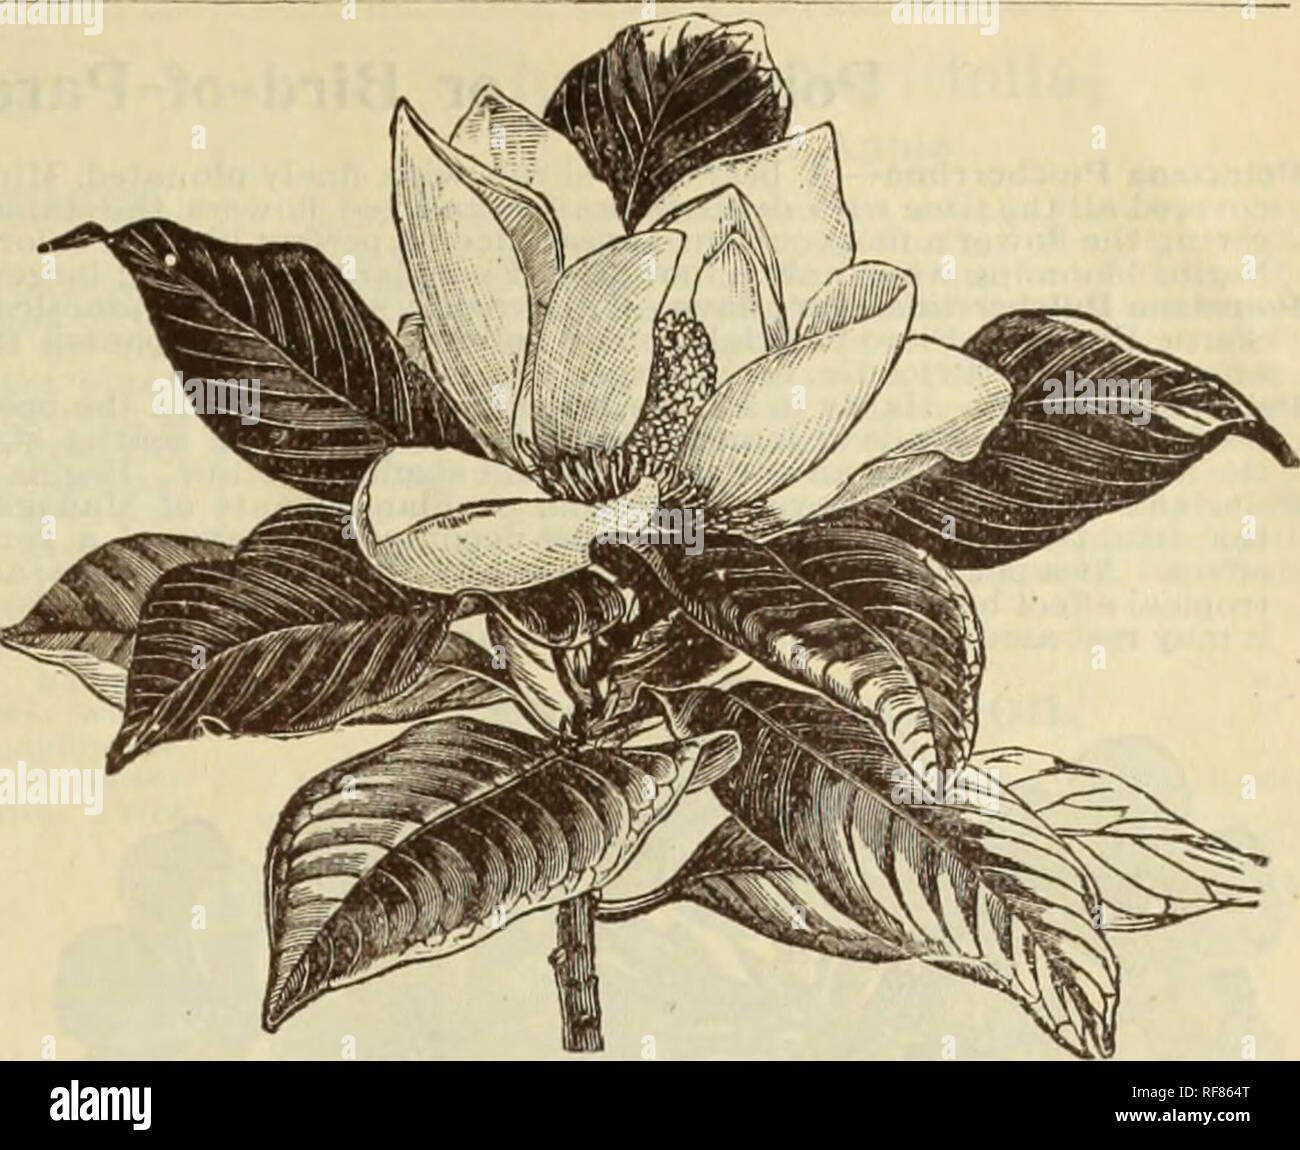 . Catalogue of rare Florida flowers and fruits : season of 1894. Nurseries (Horticulture) Florida Catalogs; Flowers Catalogs; Plants, Ornamental Catalogs. CATALOCIUK OF RARE KI,()R11)  FLOW KKS AND FRUI TS FOR I 894. 43 Magnolia Qlauca. Laurel Magnolia or Sweet Bay. A beautiful shrubby species entirely distinct from the others. Leaves small, glossy green above and silvery white beneath, forming a most beauti- ful object when stirred by a breeze. Flowers about the size of a silver dollar, creamy white, and delightfully fragrant. Perfectly hardy in Massachusetts, but can be treated as a tub pla Stock Photo